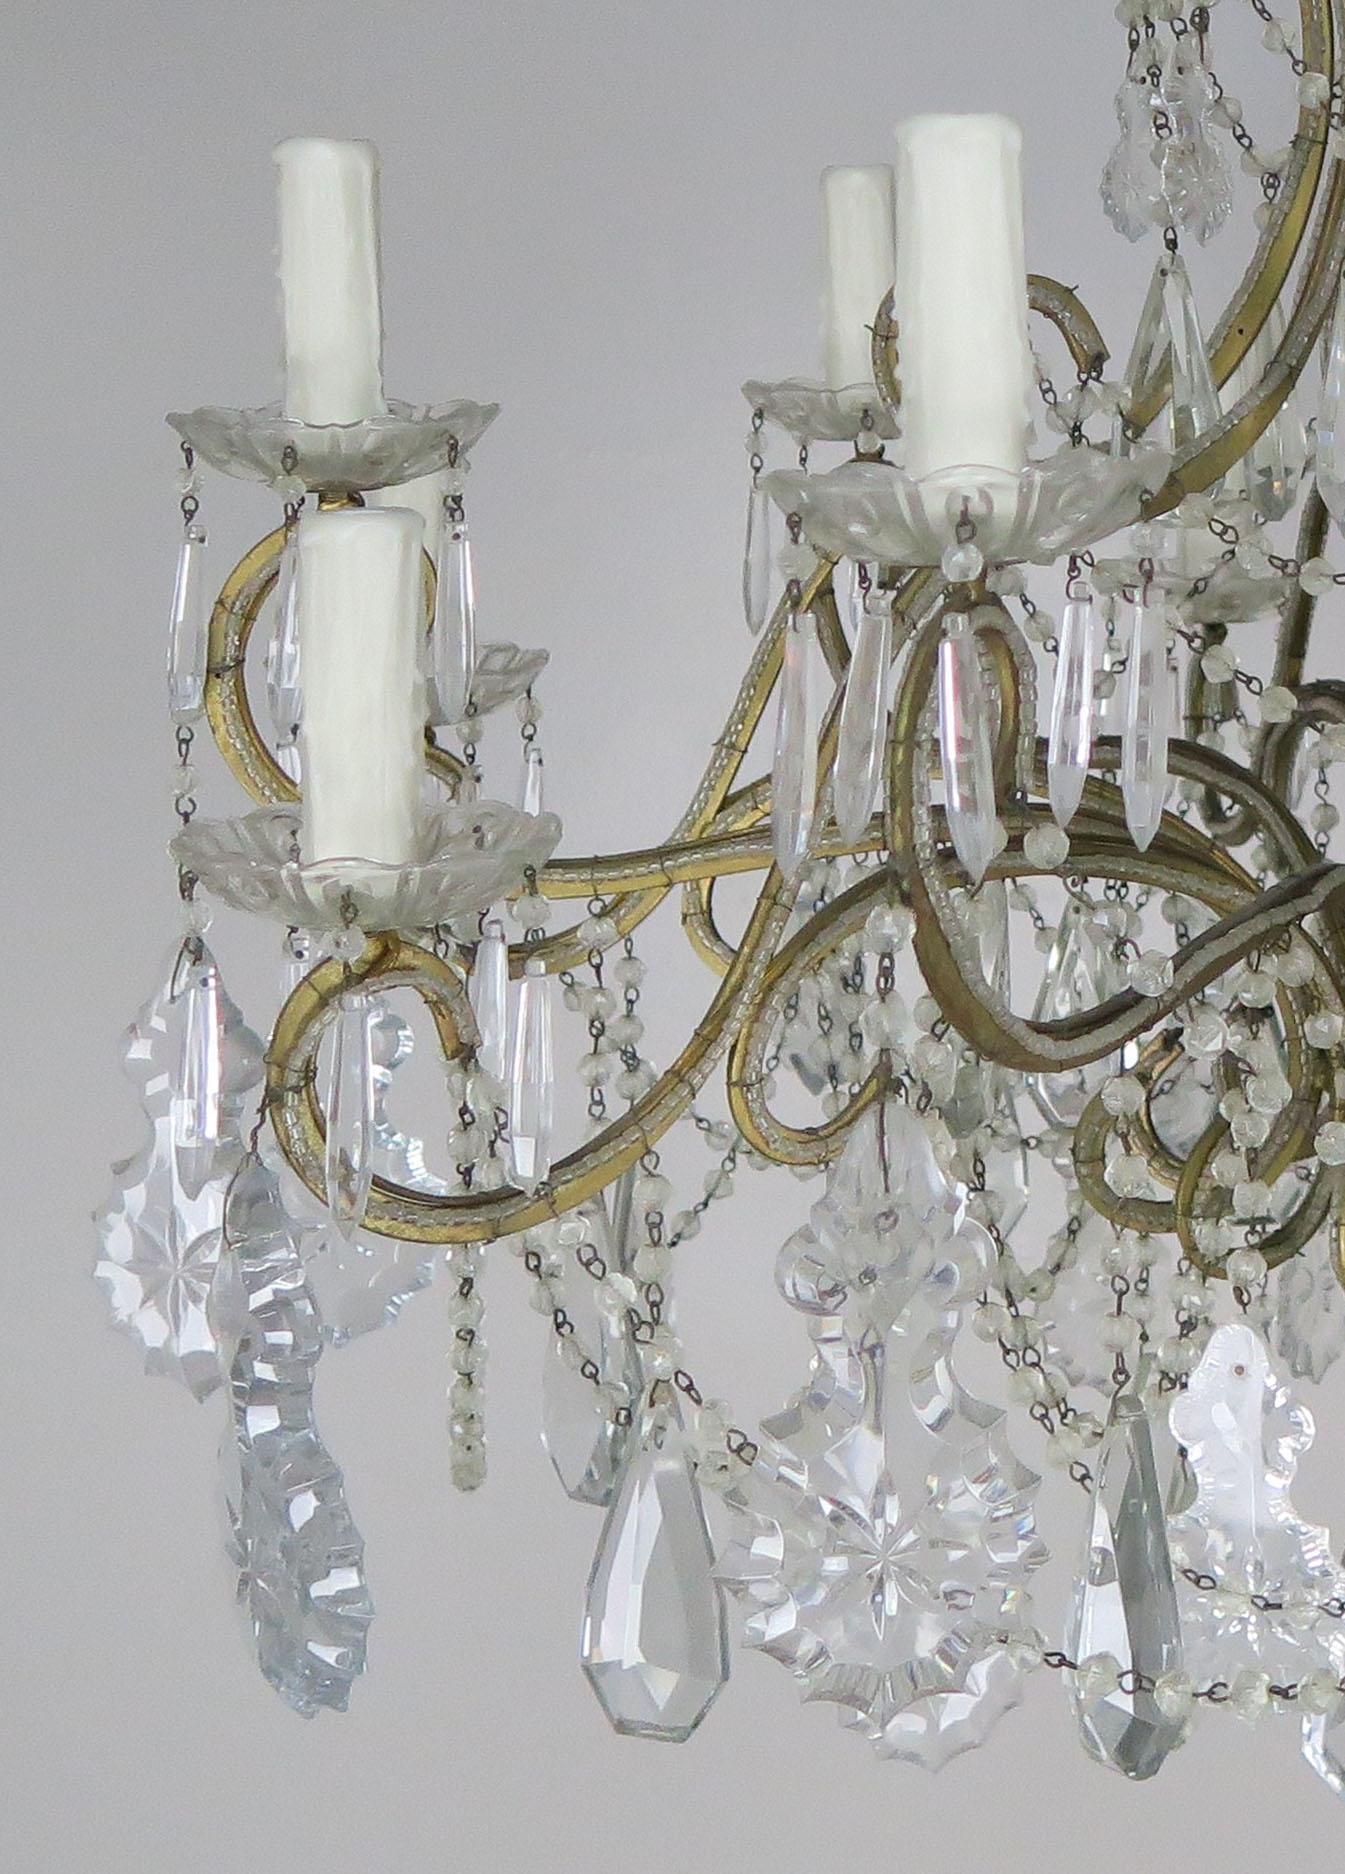 10-light French Louis XV style crystal beaded chandelier, circa 1930s. The chandelier is adorned with etched cut pendulum shaped crystals and garlands of English cut beads throughout. The fixture is newly rewired with drip wax candle covers and